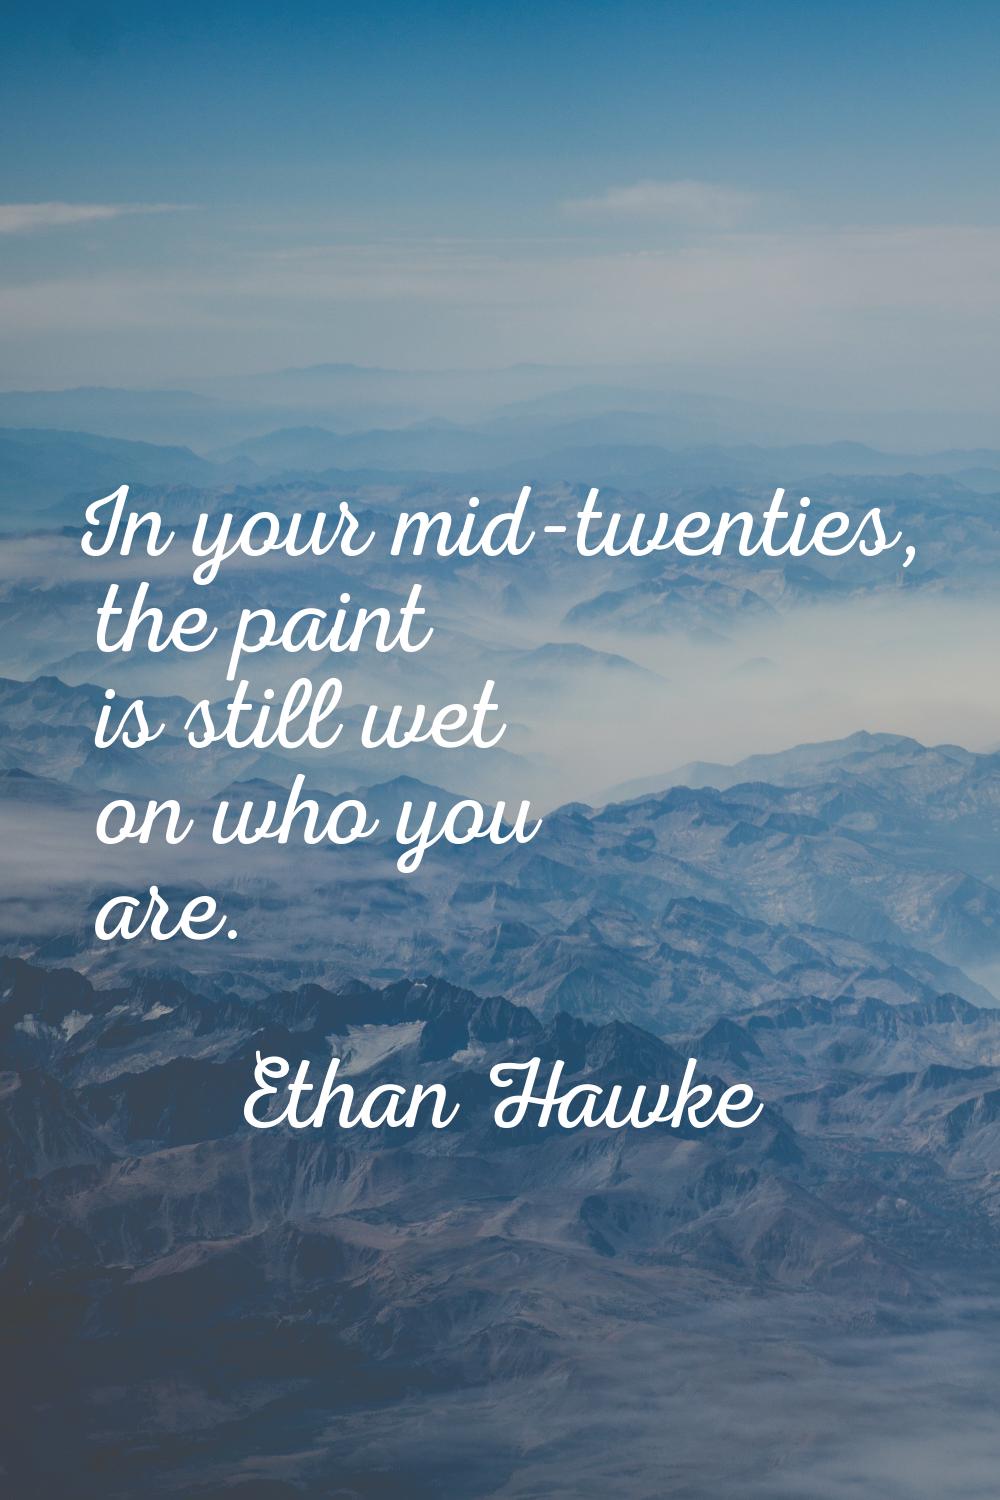 In your mid-twenties, the paint is still wet on who you are.